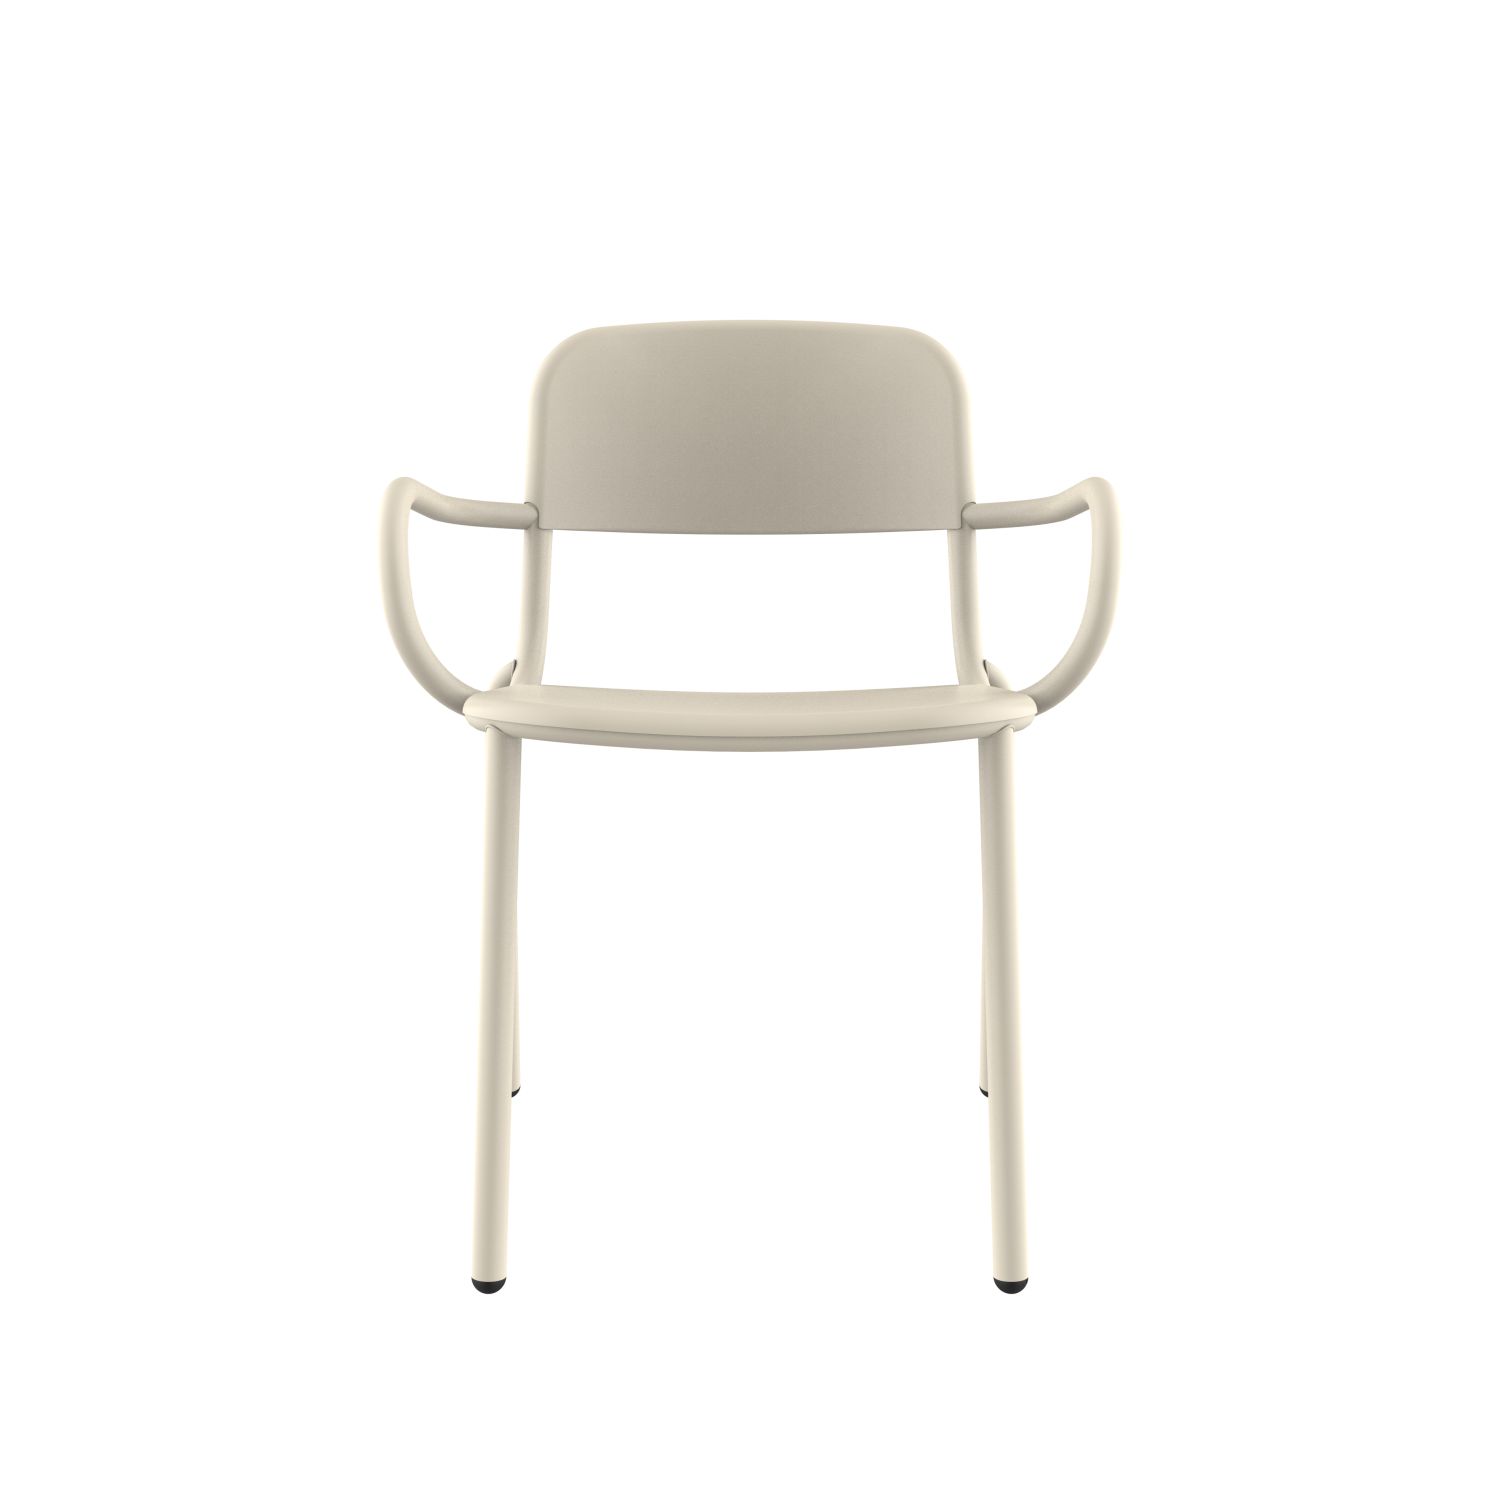 lensvelt studio stefan scholten loop chair stackable with armrests no perforation oyster white ral1013